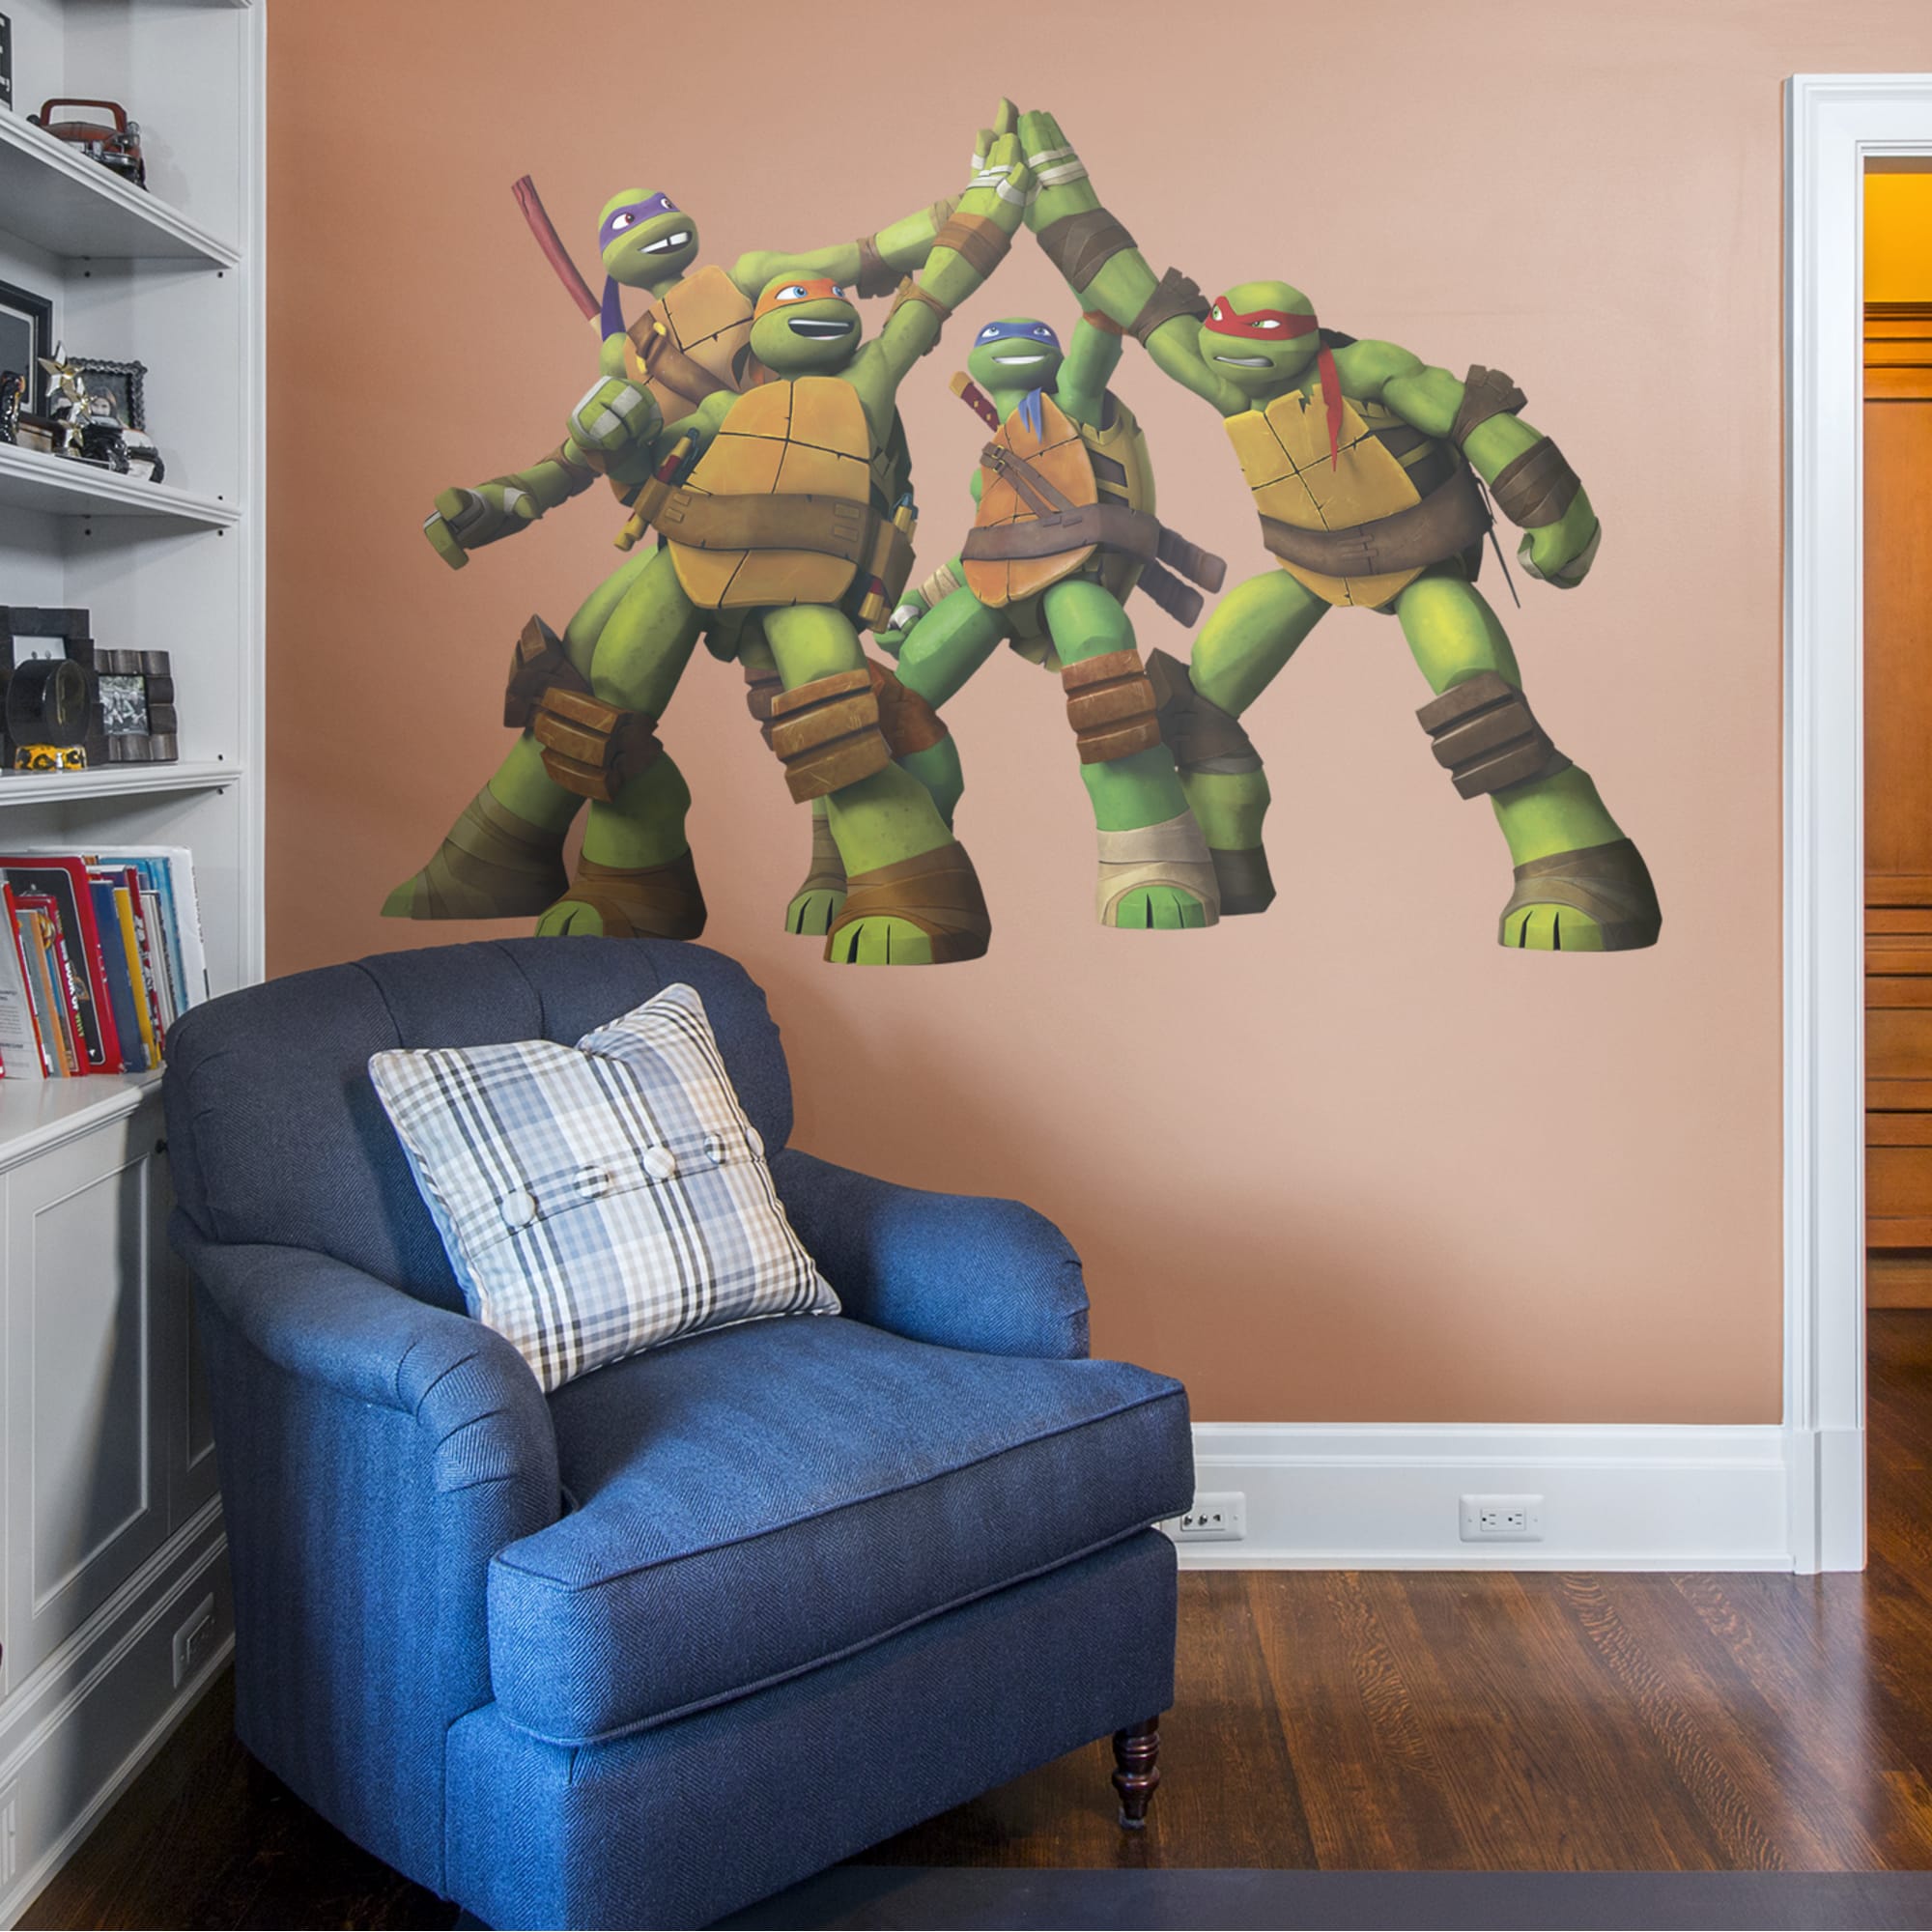 Teenage Mutant Ninja Turtles: High Five - Officially Licensed Removable Wall Decal 75.0"W x 51.0"H by Fathead | Vinyl